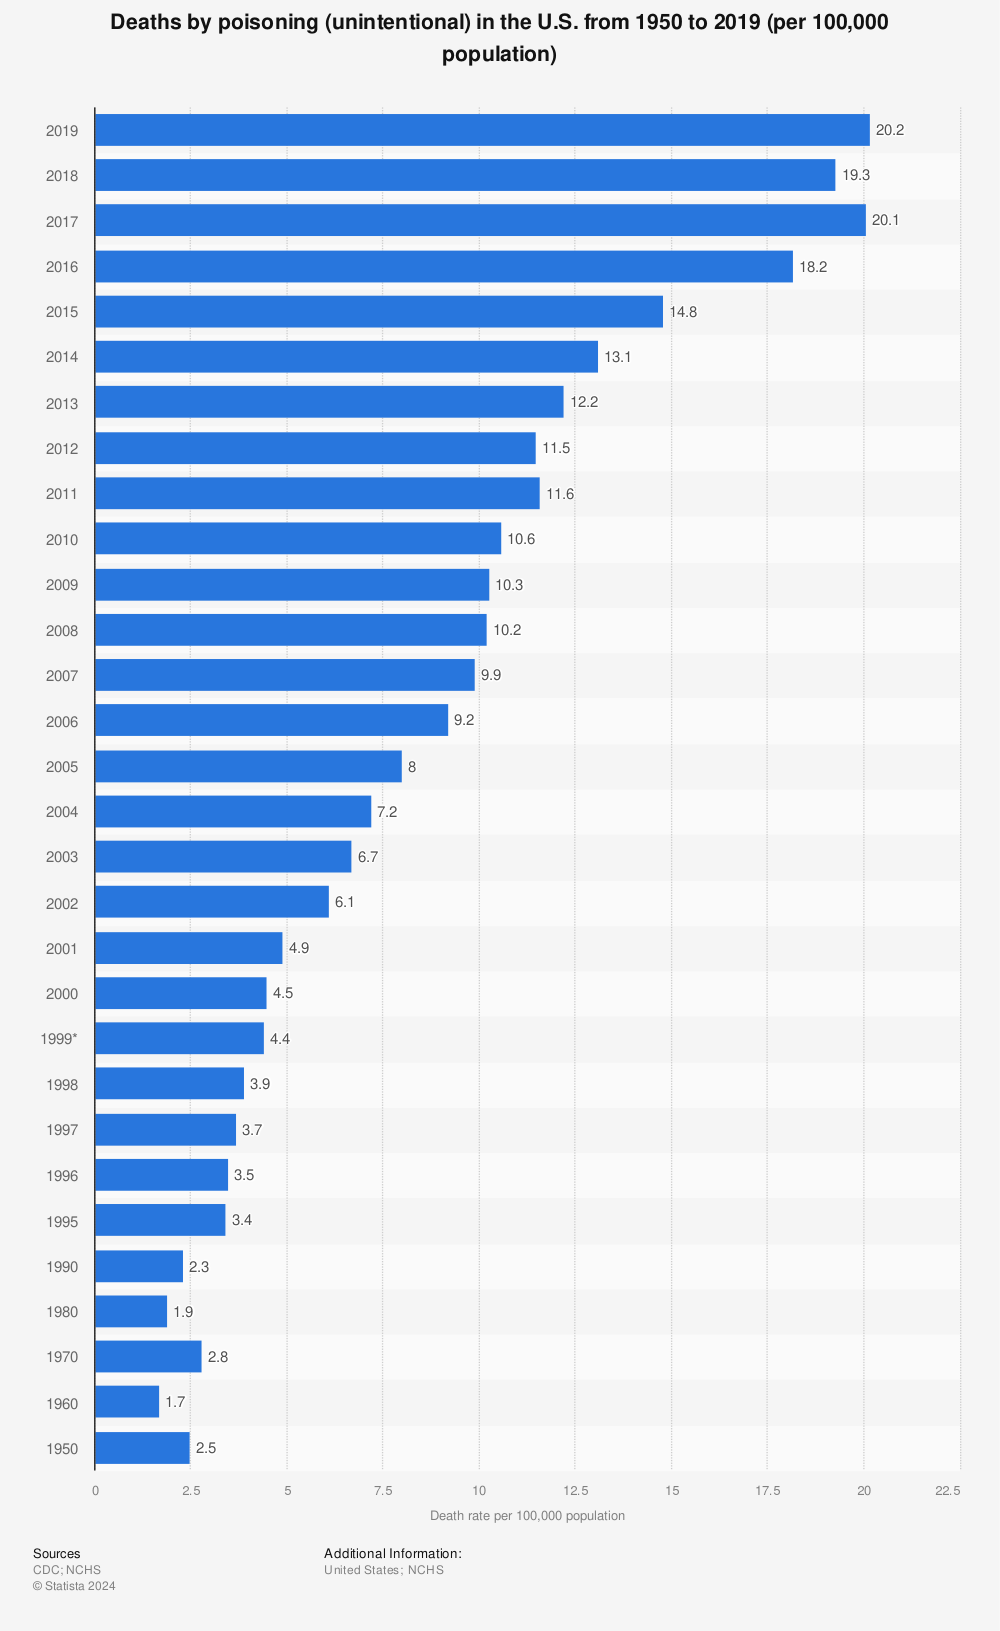 Statistic: Deaths by poisoning (unintentional) in the U.S. from 1950 to 2018 (per 100,000 population) | Statista